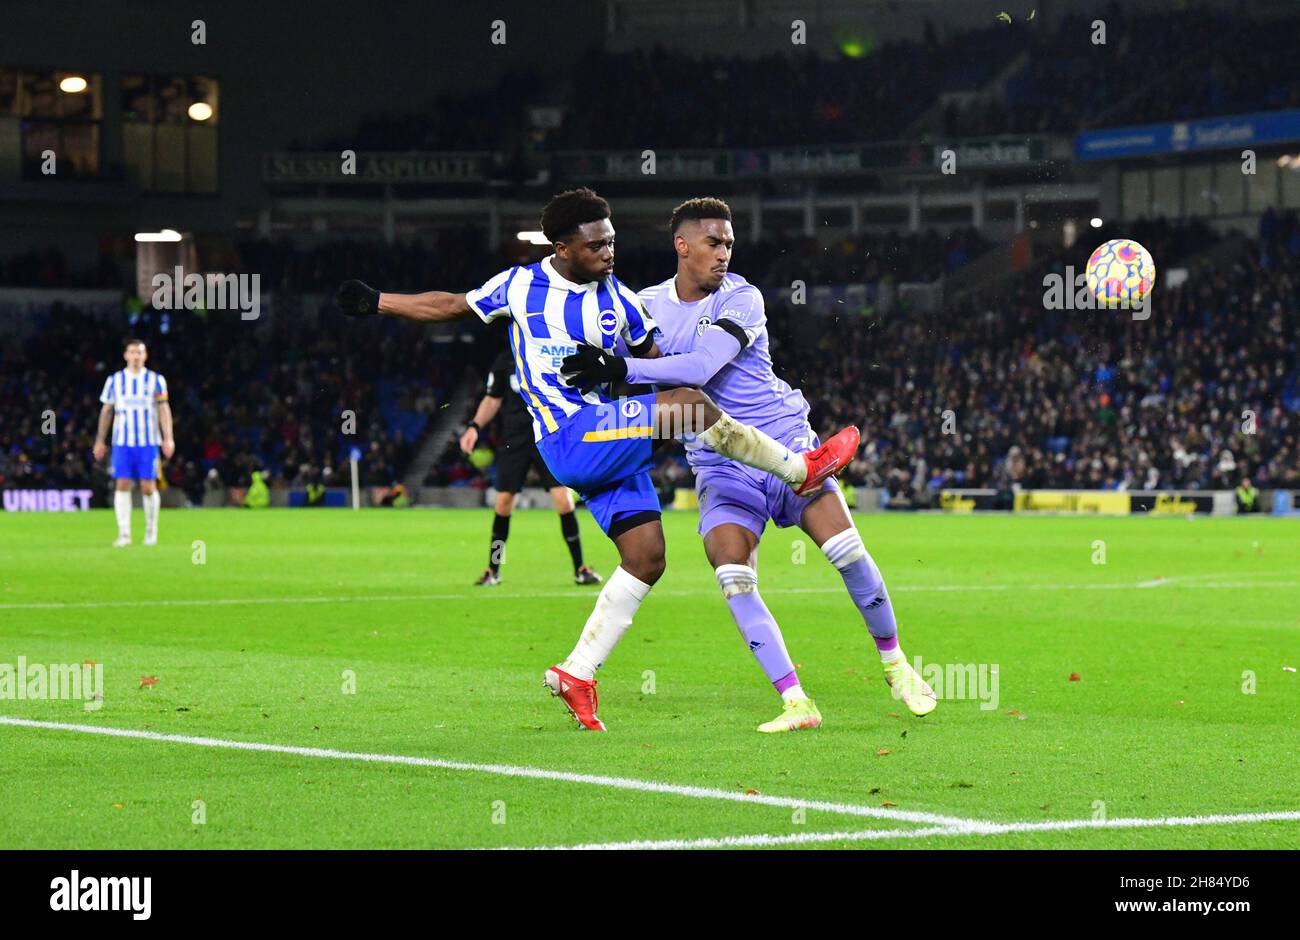 Brighton, UK. 27th Nov, 2021. Tariq Lamptey of Brighton and Hove Albion manages to cross the ball into the box under pressure from Junior Firpo of Leeds United during the Premier League match between Brighton & Hove Albion and Leeds United at The Amex on November 27th 2021 in Brighton, England. (Photo by Jeff Mood/phcimages.com) Credit: PHC Images/Alamy Live News Stock Photo